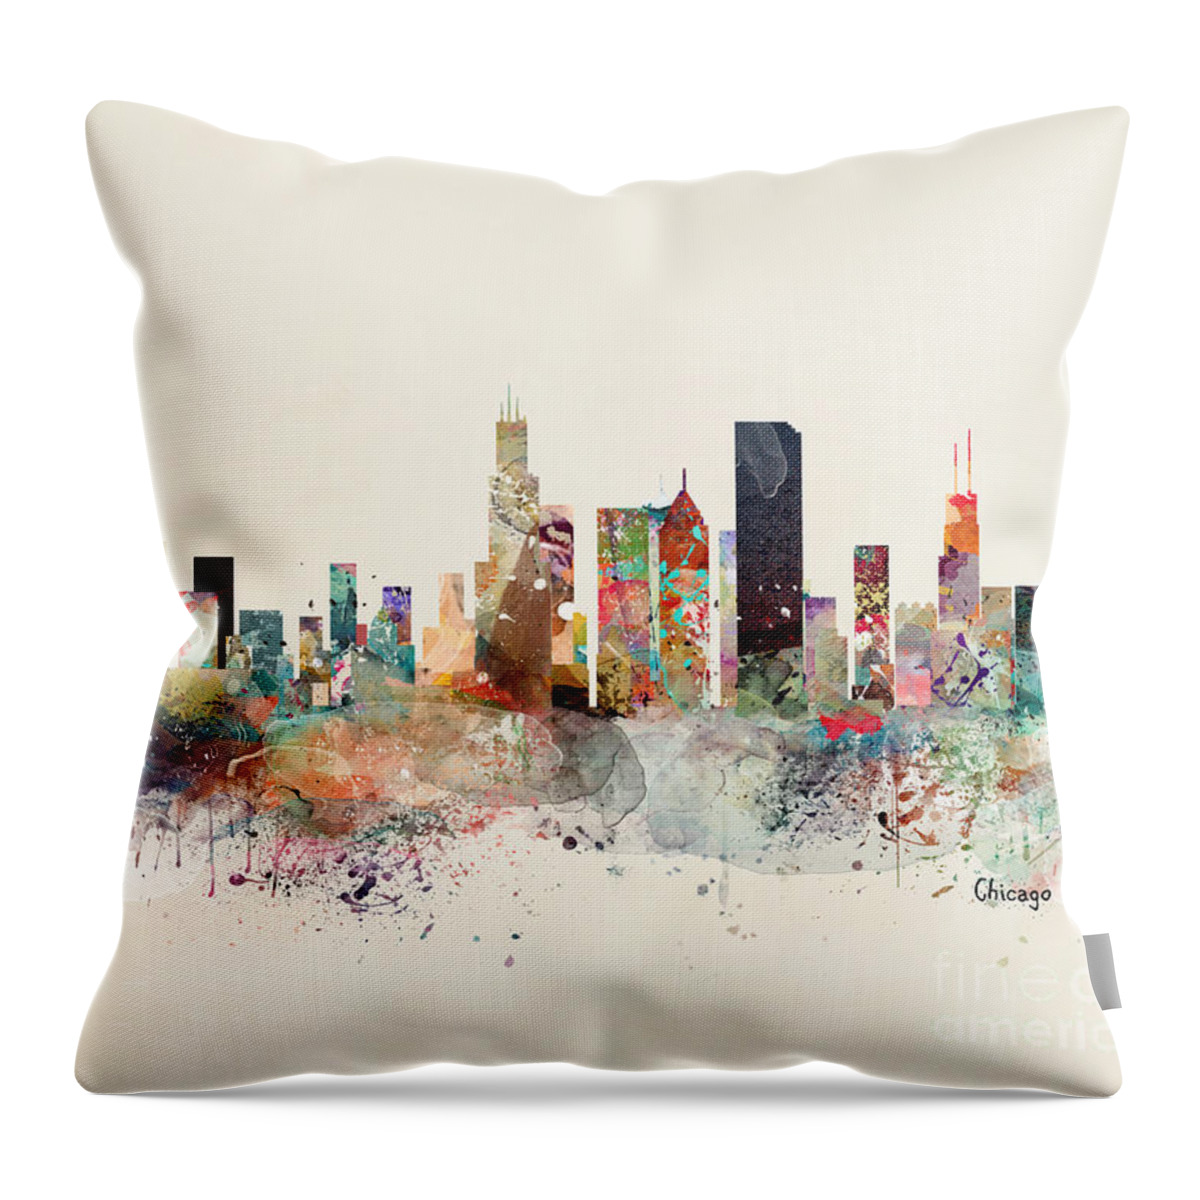 Chicago City Skyline Throw Pillow featuring the painting Chicago Illinois Skyline #4 by Bri Buckley